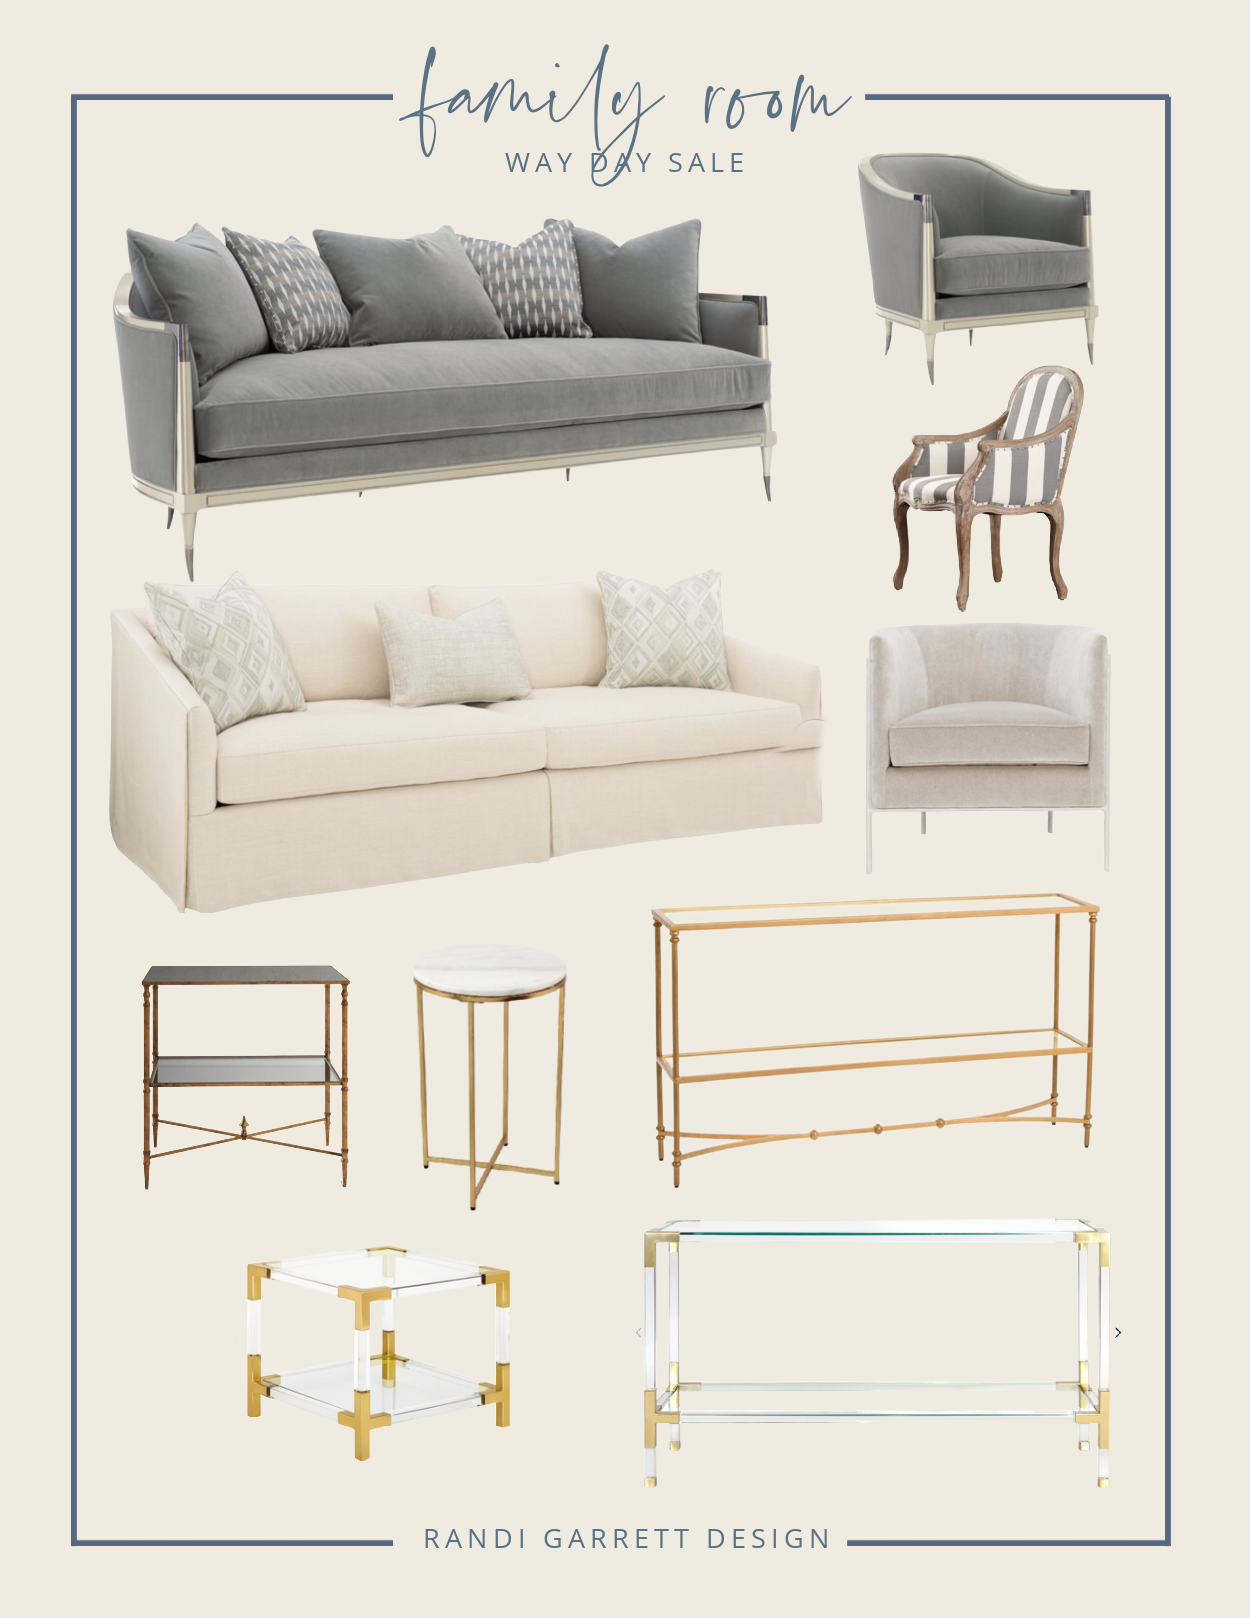 Way Day Sale - Your Favs + My Look for Less - living room